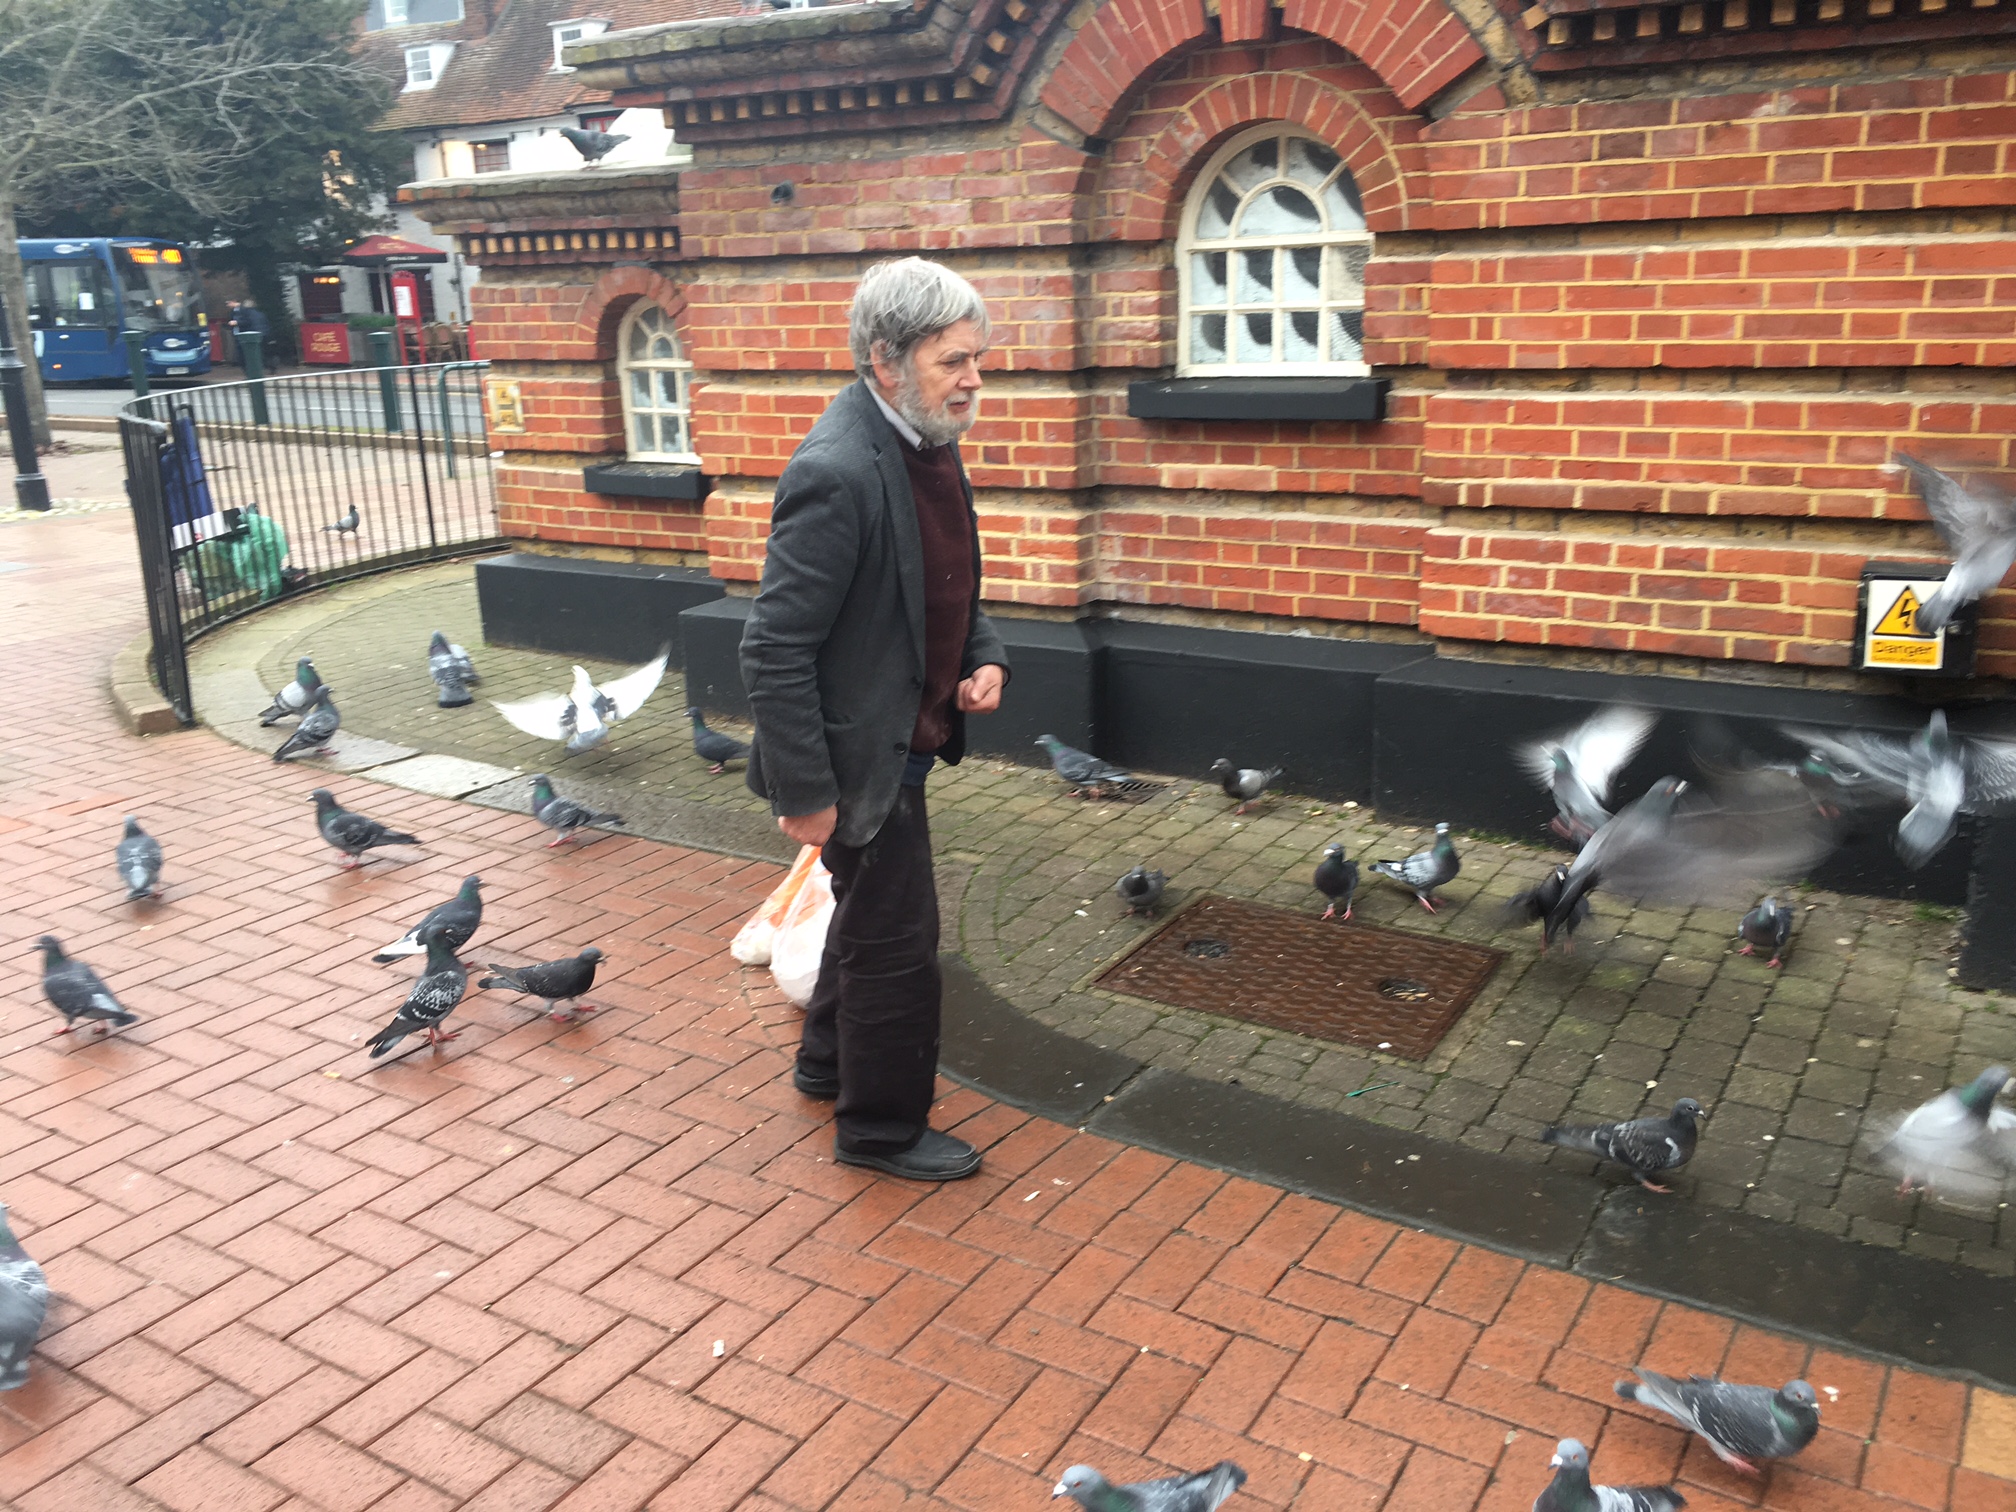 COMMENT: Stop feeding pigeons and helping these flying rats to spread their filth